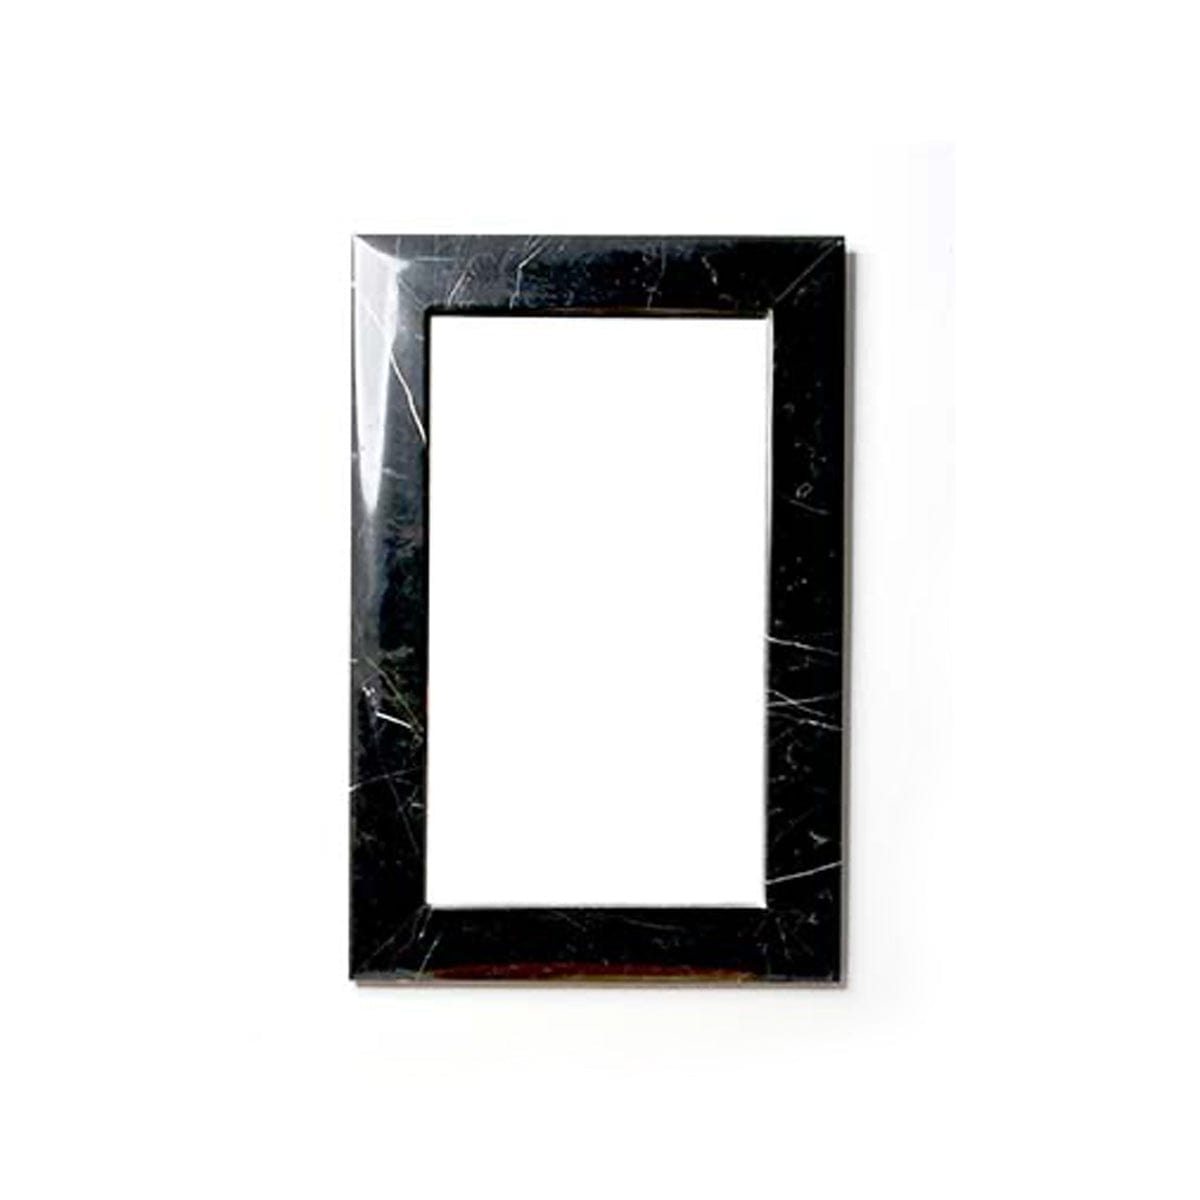 Lautus Natural Stone Frame Mirror - M7046BM | Supply Master | Accra, Ghana Shower Caddy & Mirror Buy Tools hardware Building materials